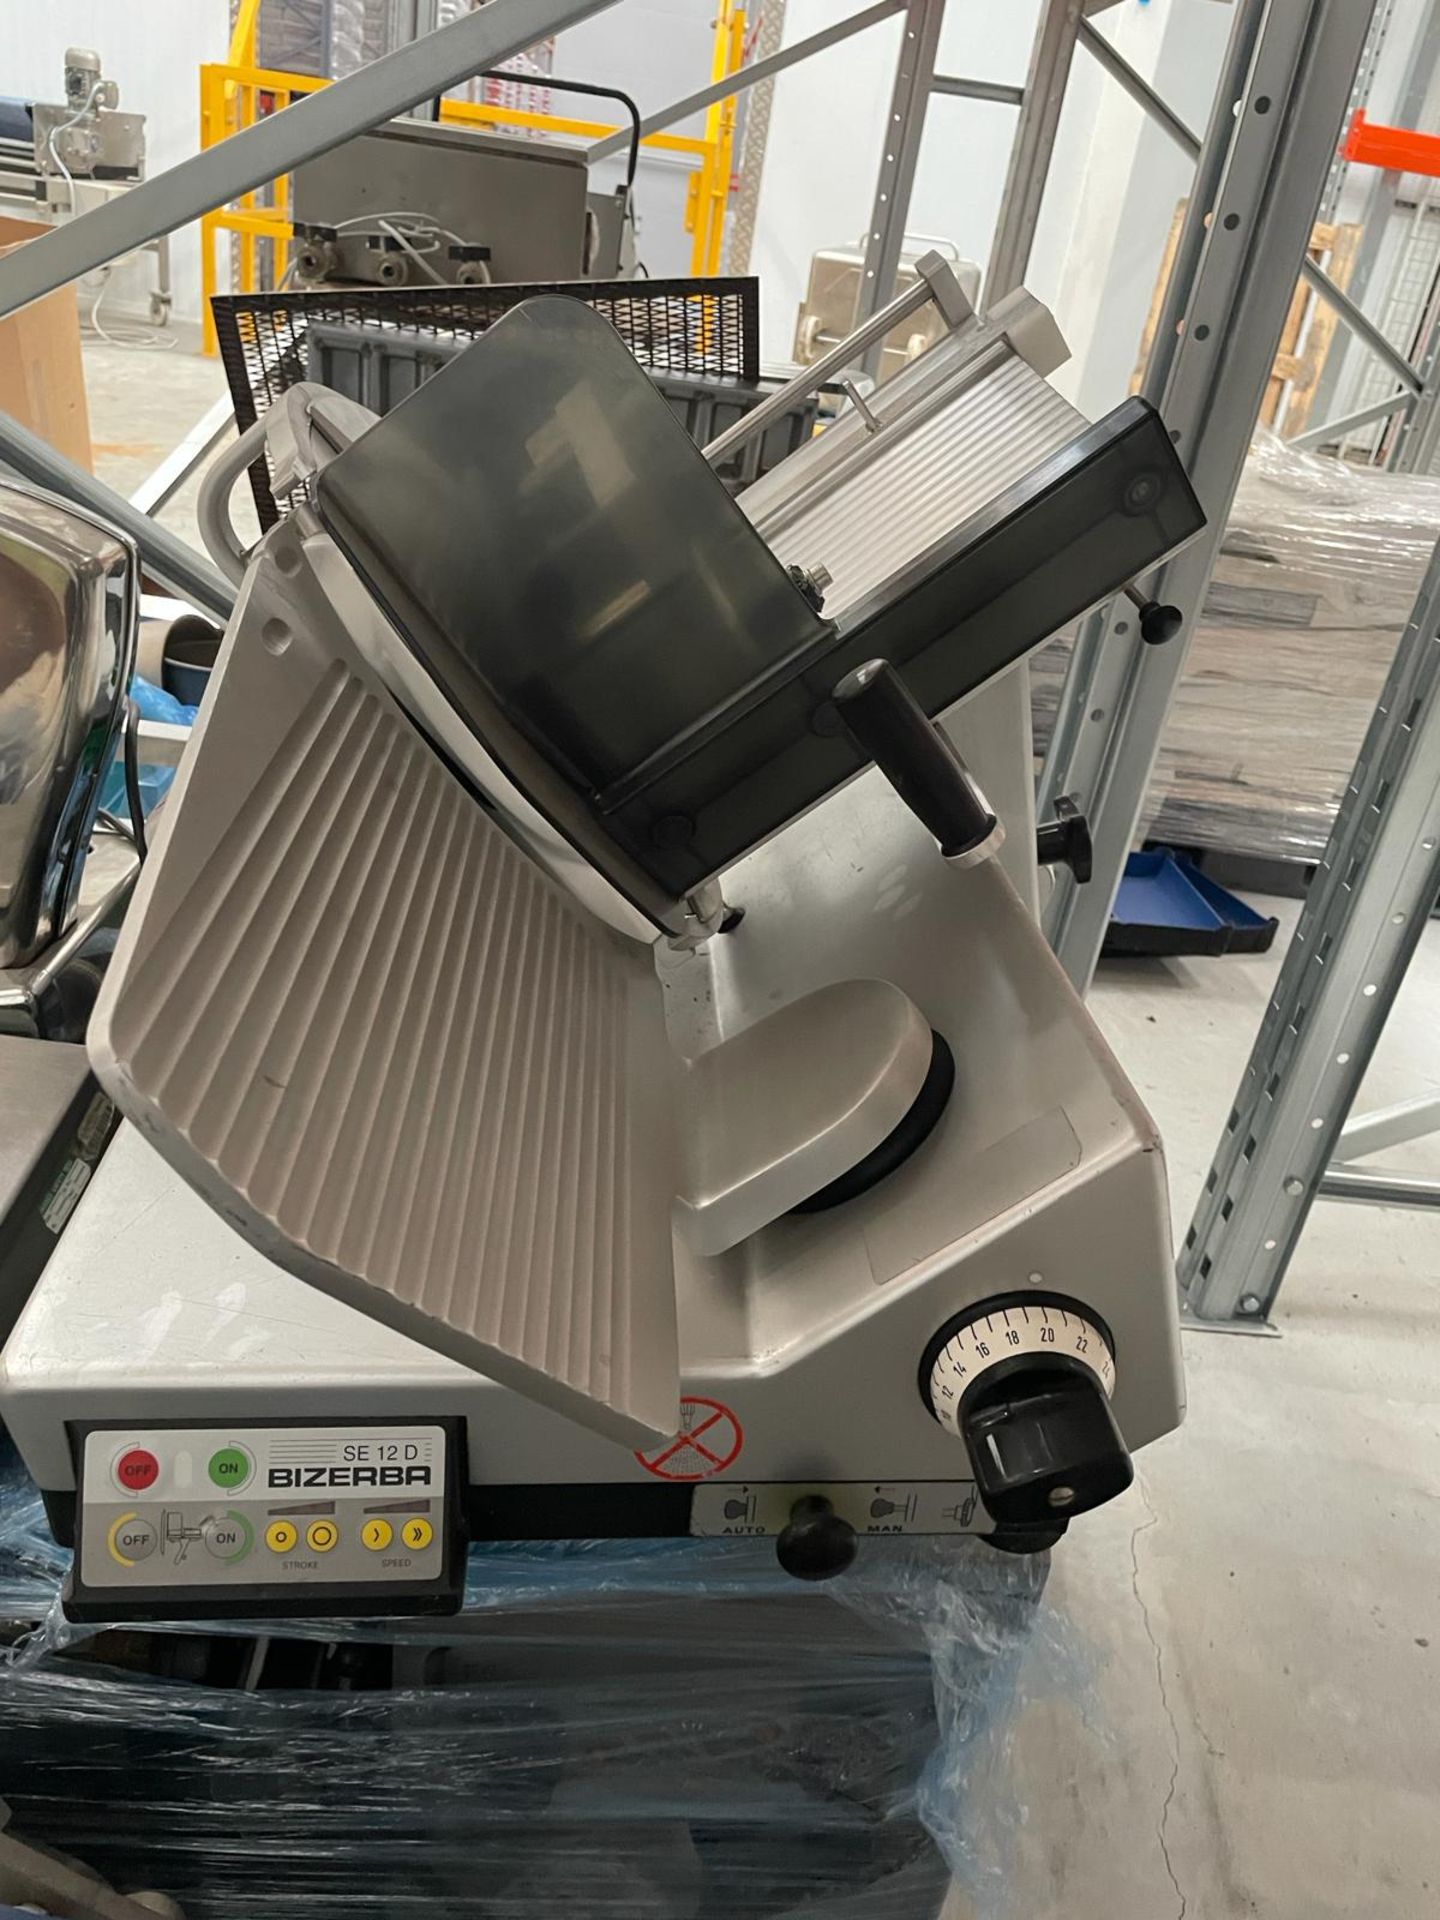 Bizerba SE 12D Meat slicer. Please note this lot is located at Unit 29, Ridge Way, Iver, Bucks, - Image 2 of 11